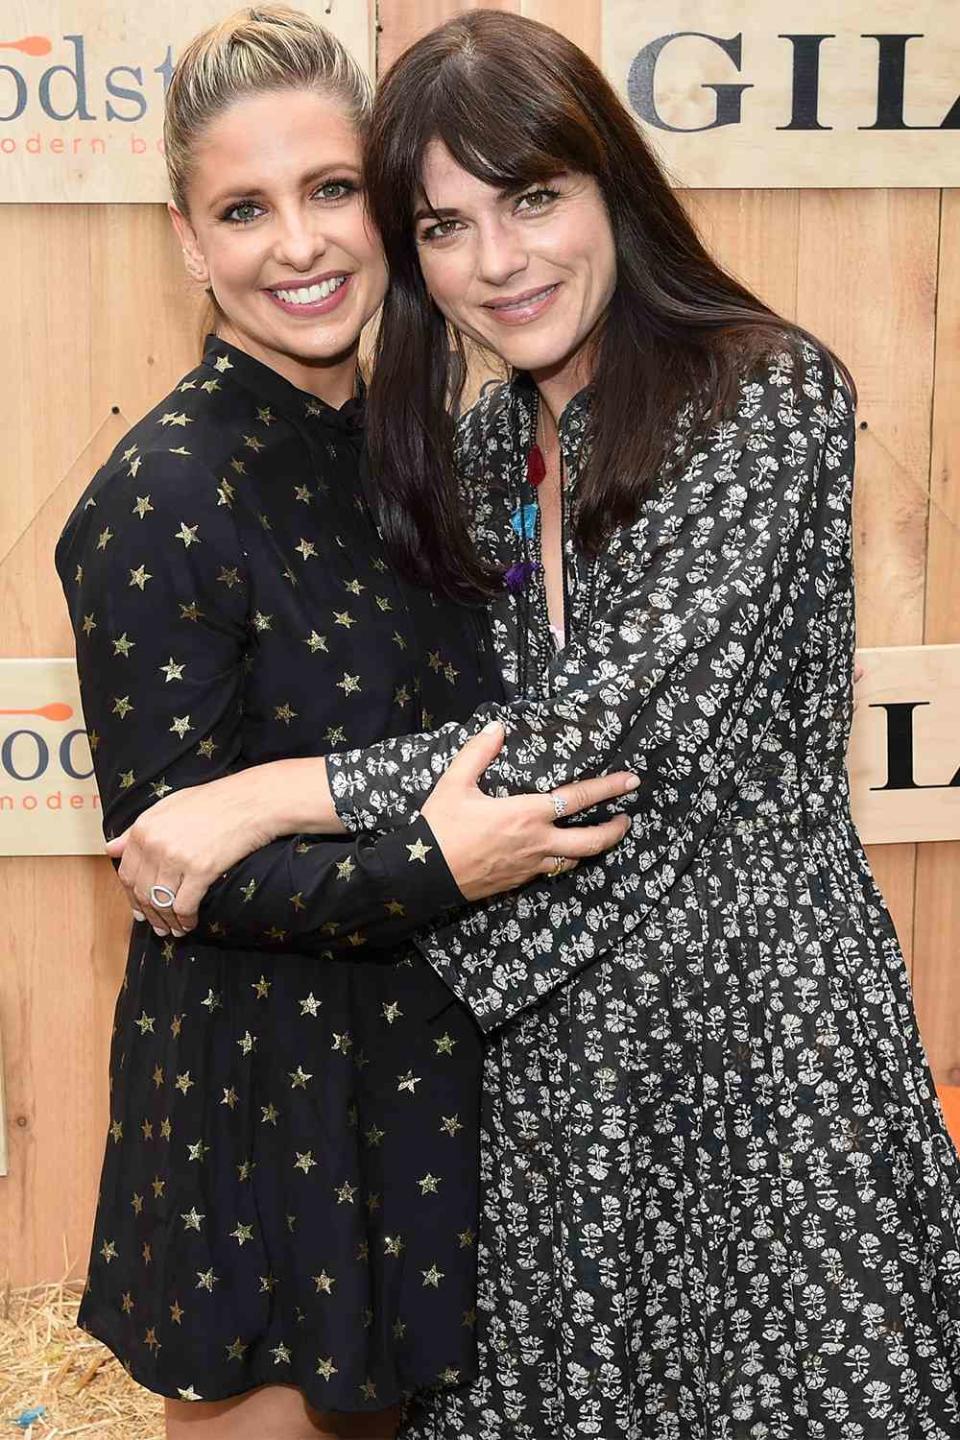 PACIFIC PALISADES, CA - OCTOBER 29: Foodstirs Co-founder/Actress Sarah Michelle Gellar (L) and actress Selma Blair attend the Gilt & Foodstirs Exclusive Cupcake Kit Celebration on October 29, 2016 in Pacific Palisades, California. (Photo by Michael Kovac/Getty Images for GILT)